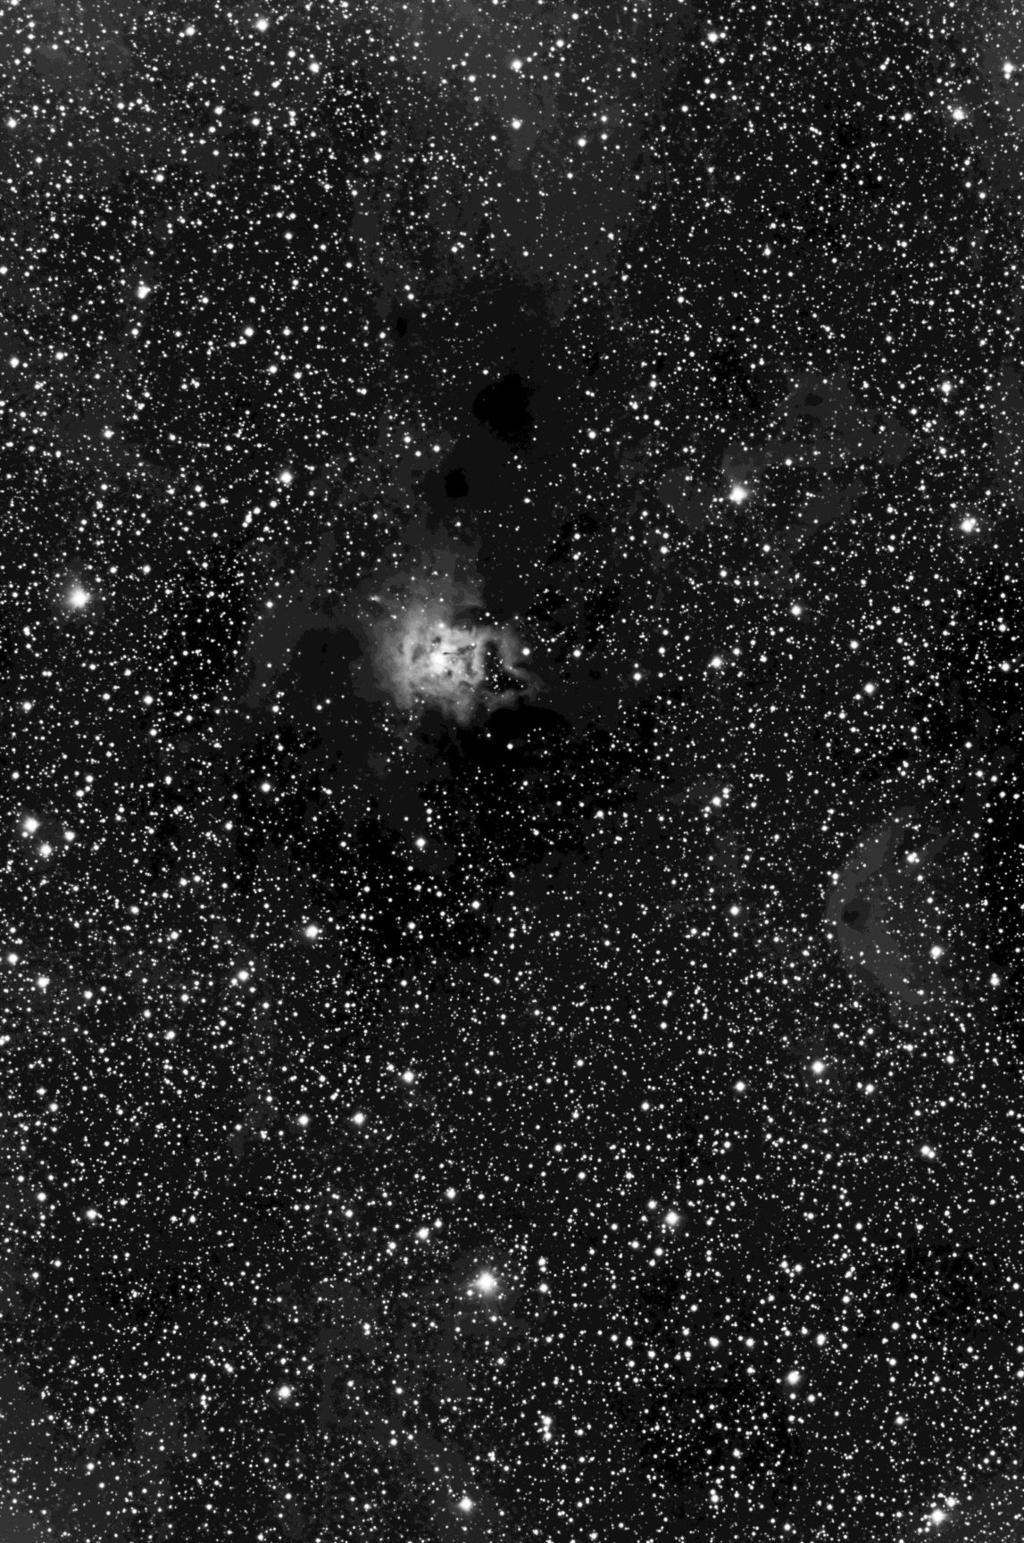 Iris Nebula by Marty Butley on April 19 Copyright May 2018.